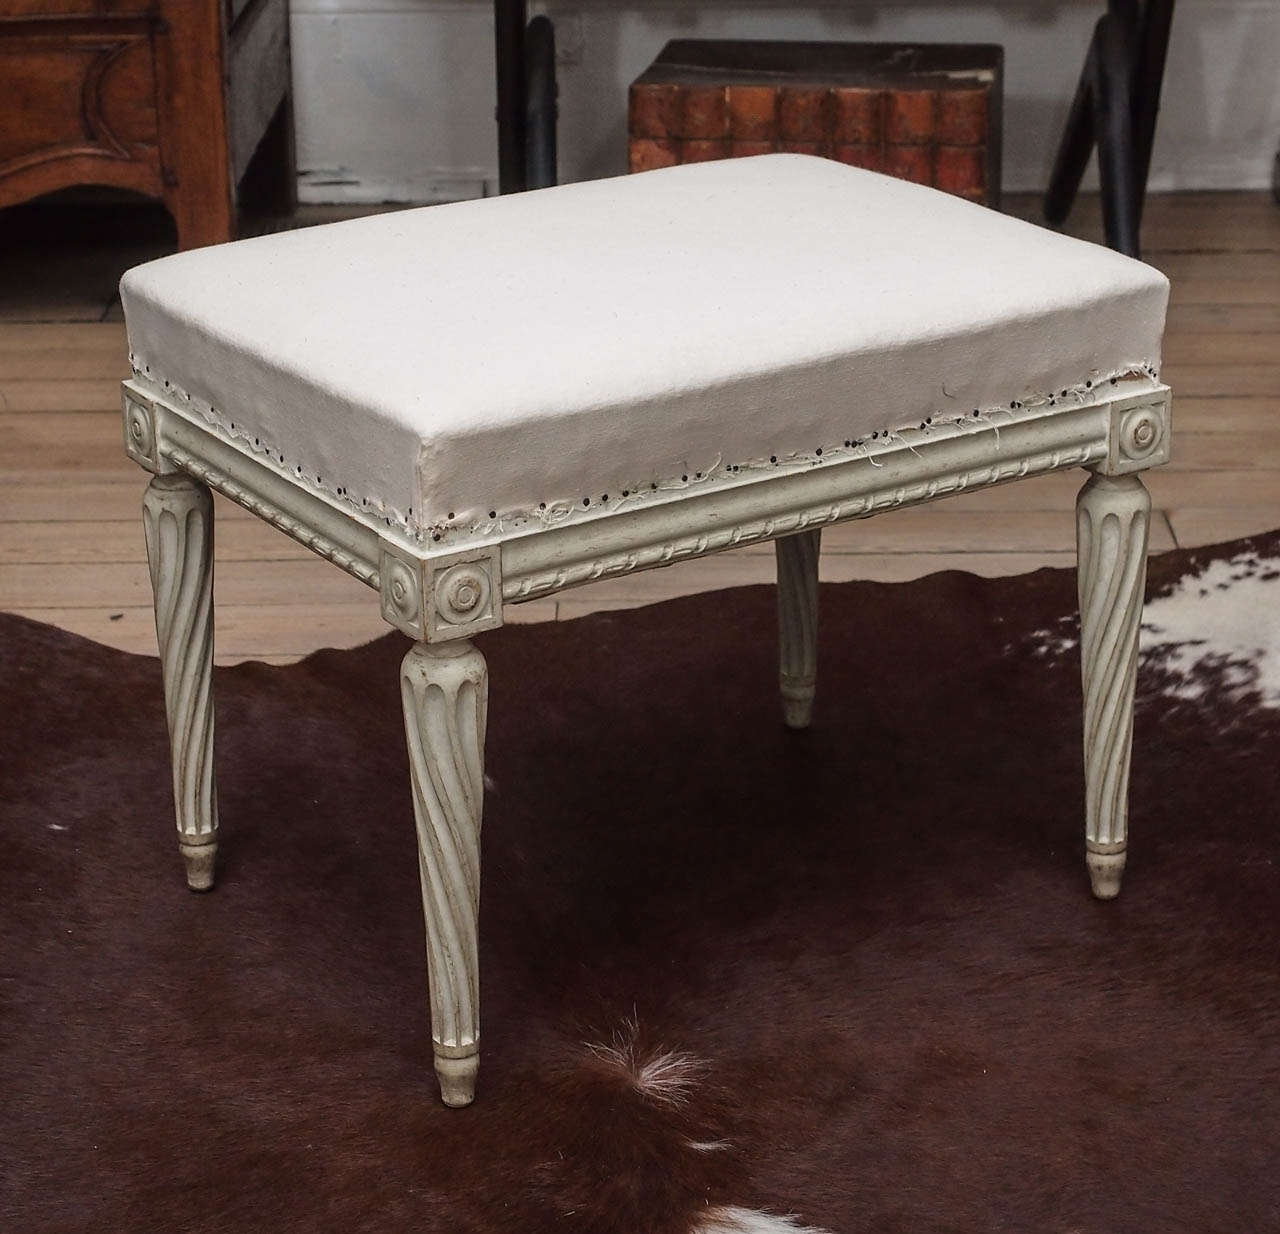 Beautiful pair of Louis XVI benches. Wood painted in antique white finish. Detailed carving around the base with fluted legs. Seat in covered in muslin, ready to be upholstered